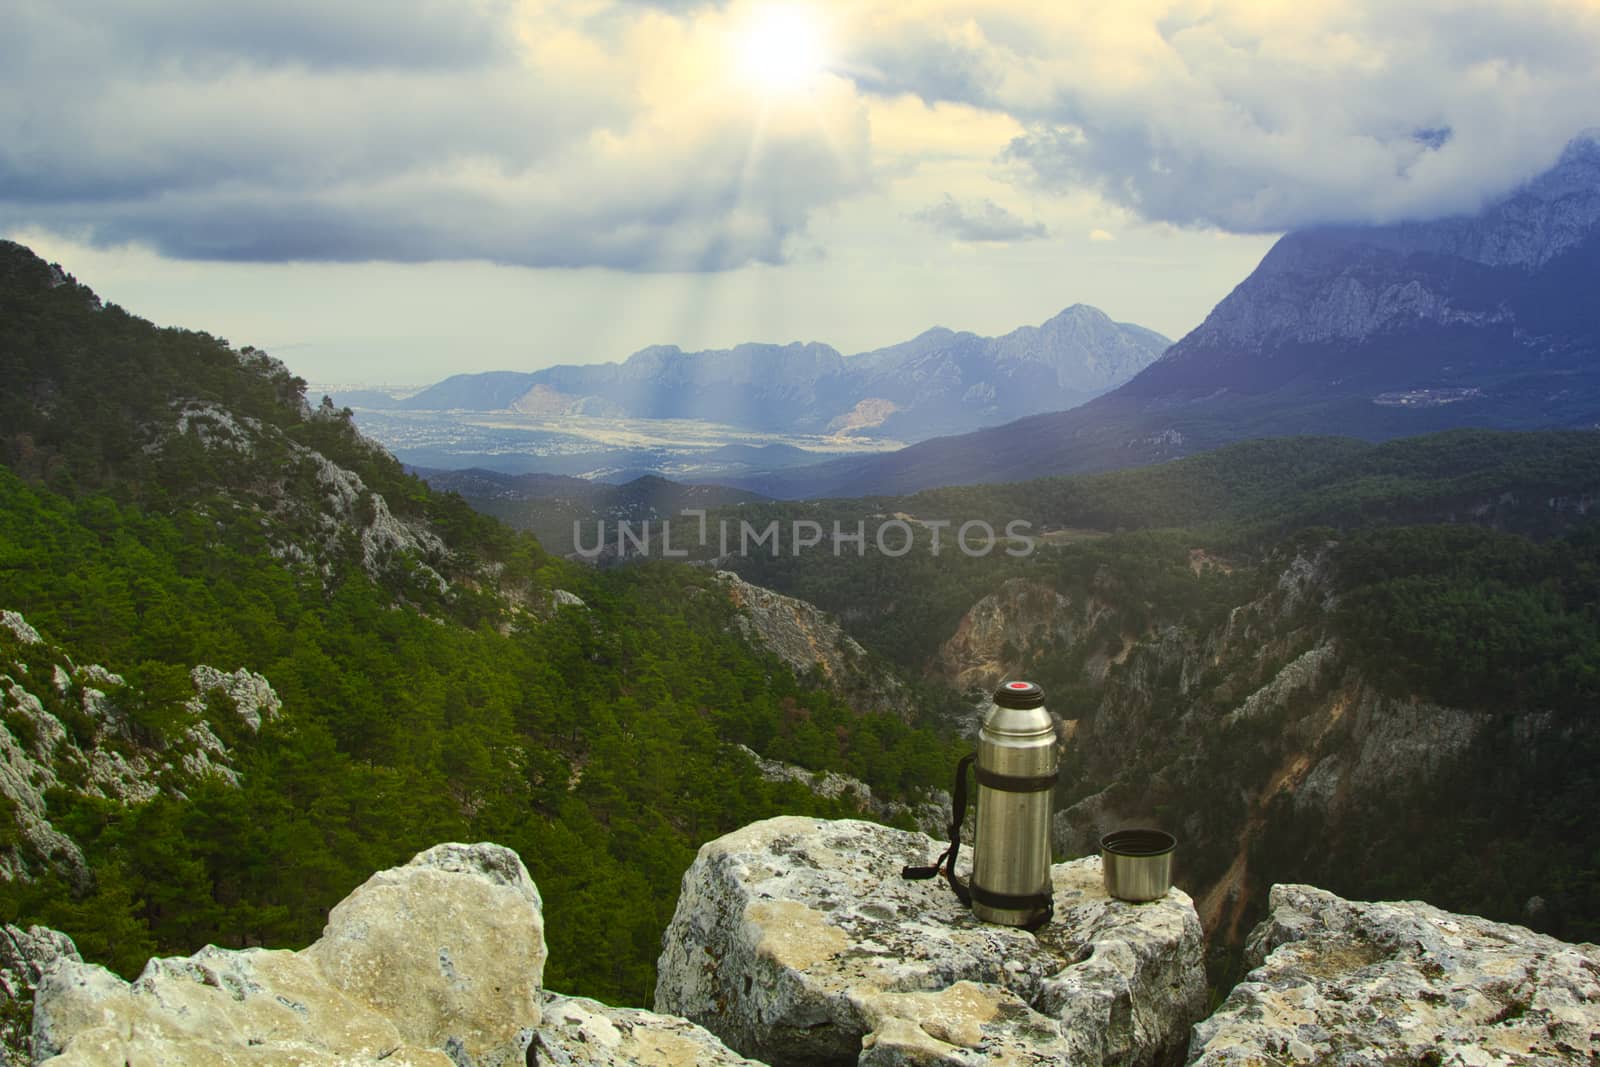 Vintage camera on rock and coffee cup in the morning with mountain view background